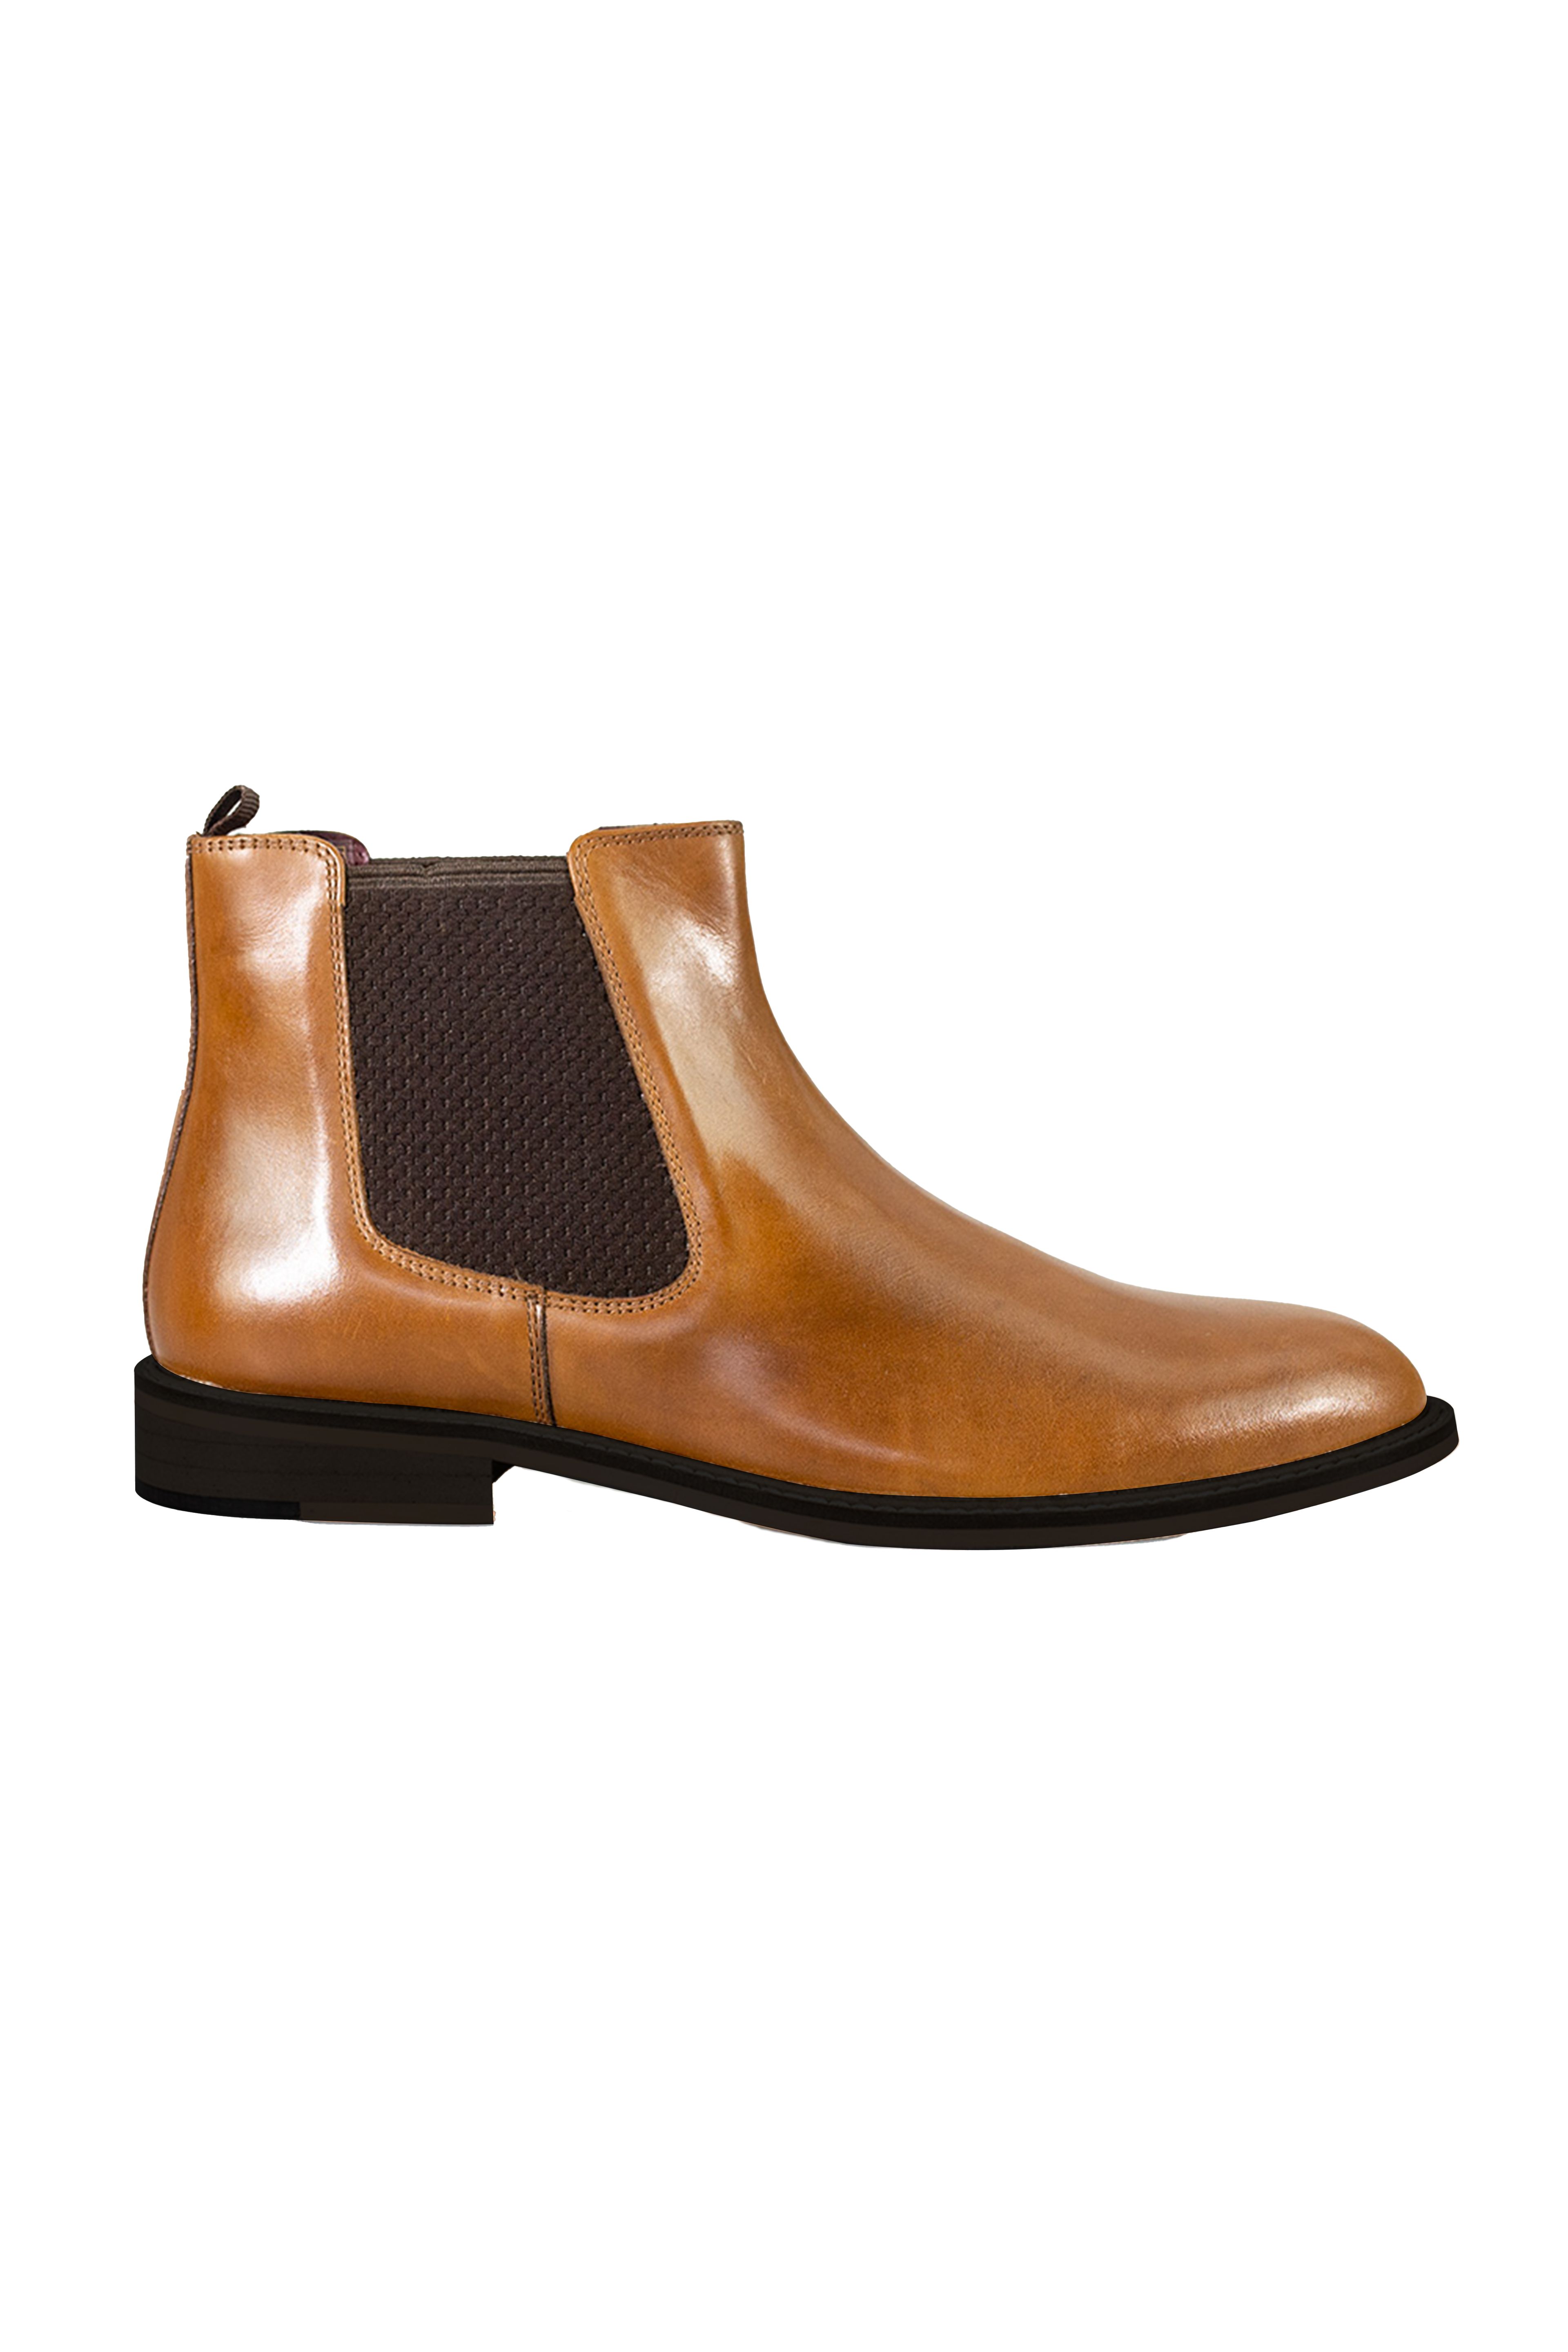 Men's Pull on Leather Chelsea Boots - WATSON Tan  - Tan Brown